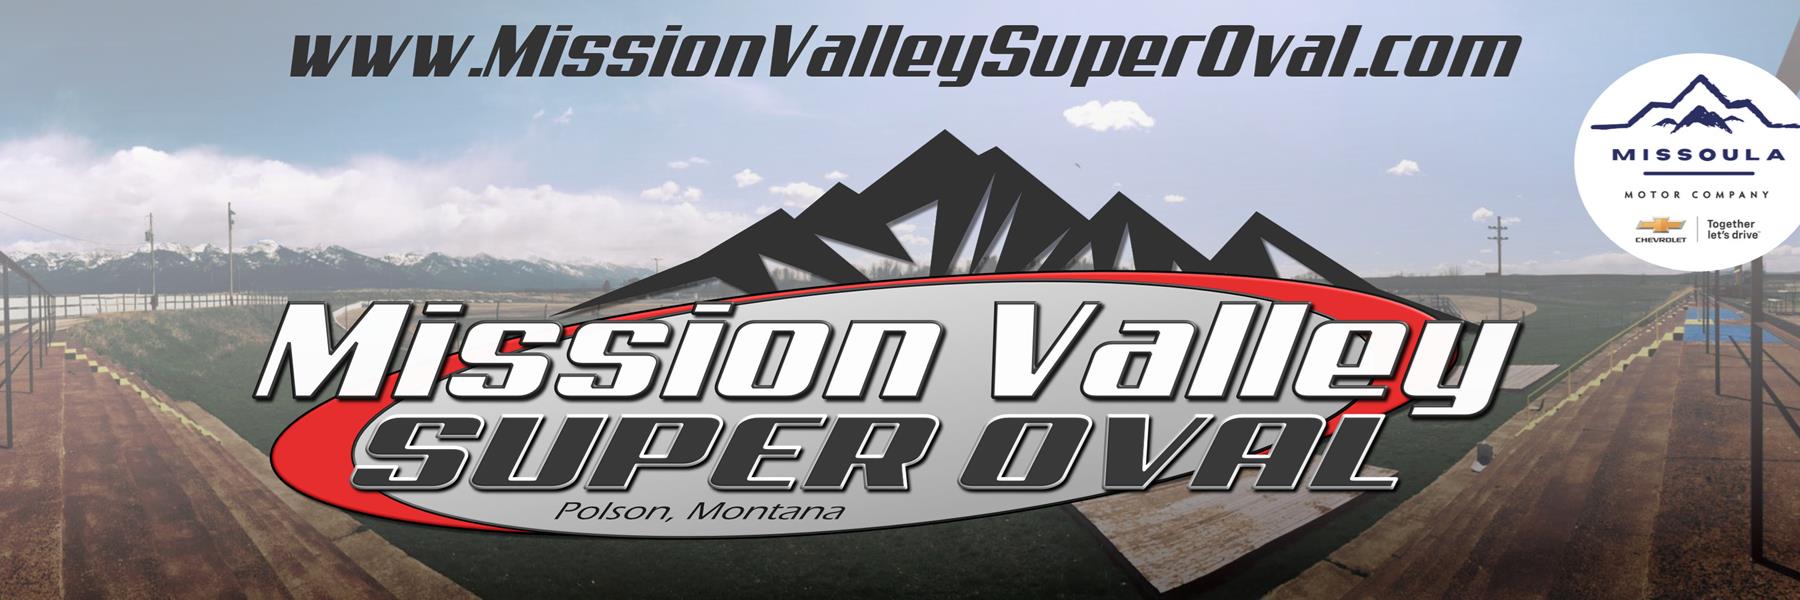 5/28/2021 - Mission Valley Super Oval